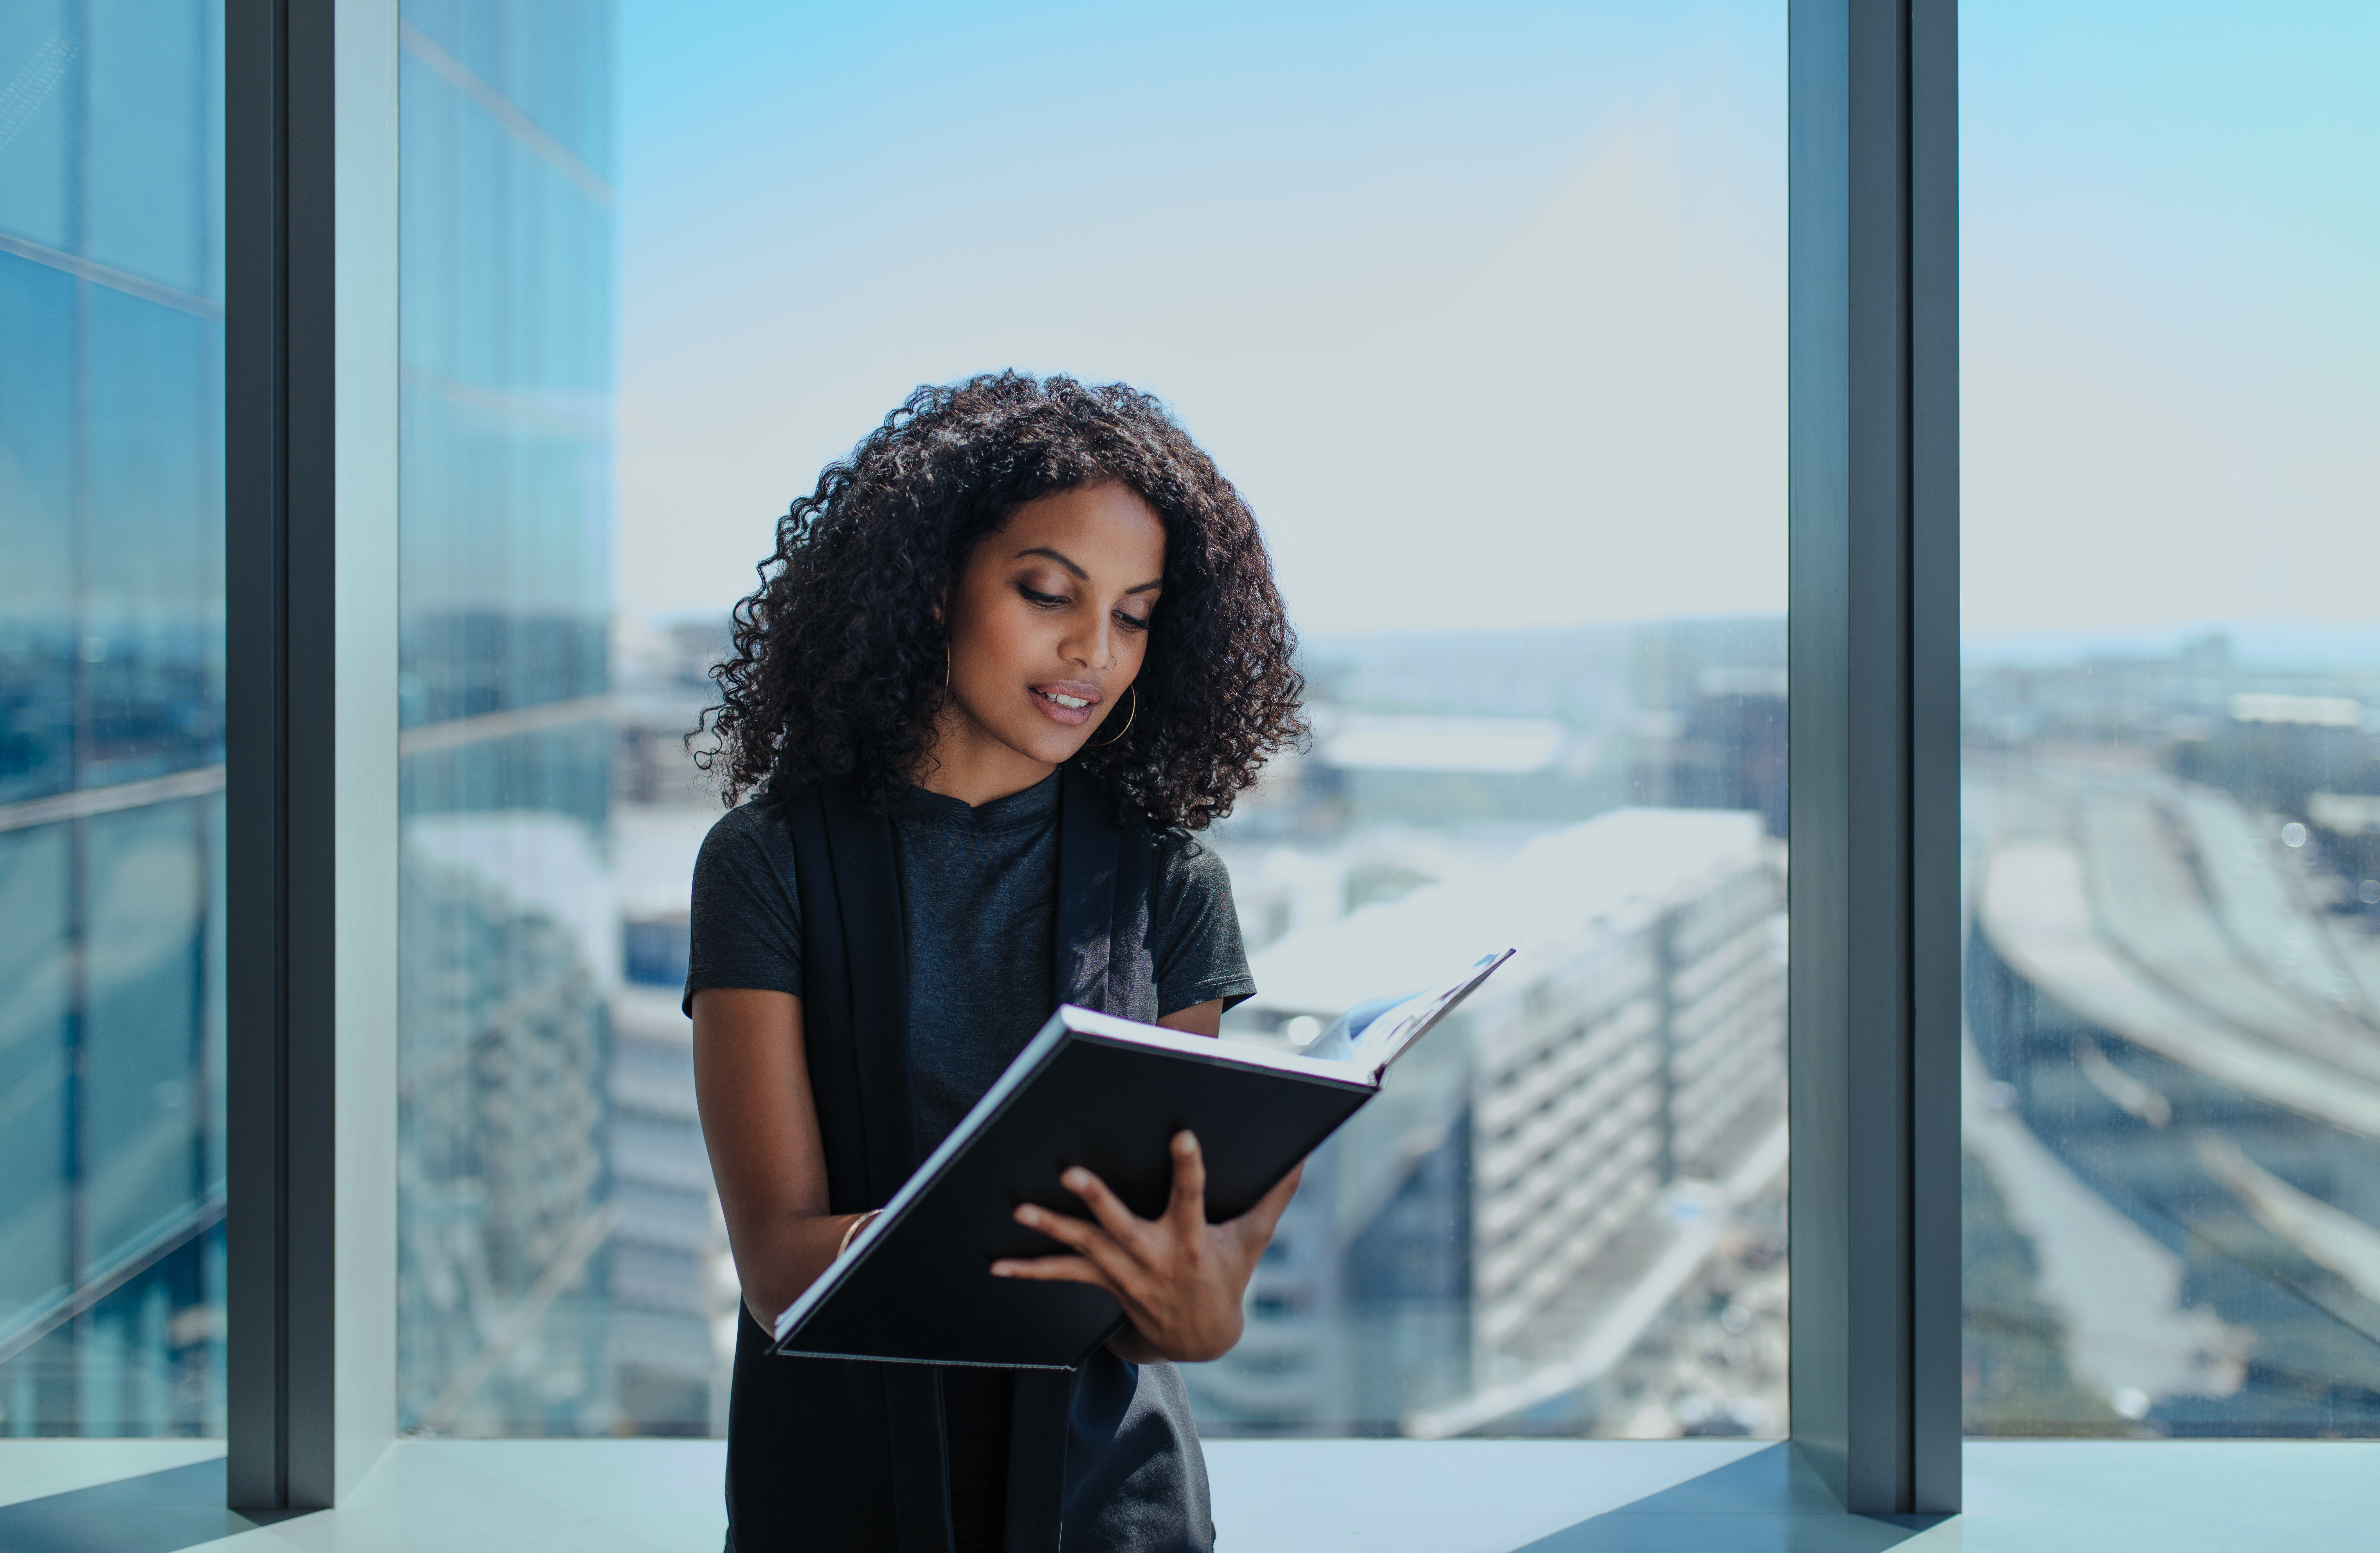 Businesswoman writing in a book standing near window in office. Businesswoman standing in her office in a highrise building overlooking the cityscape.